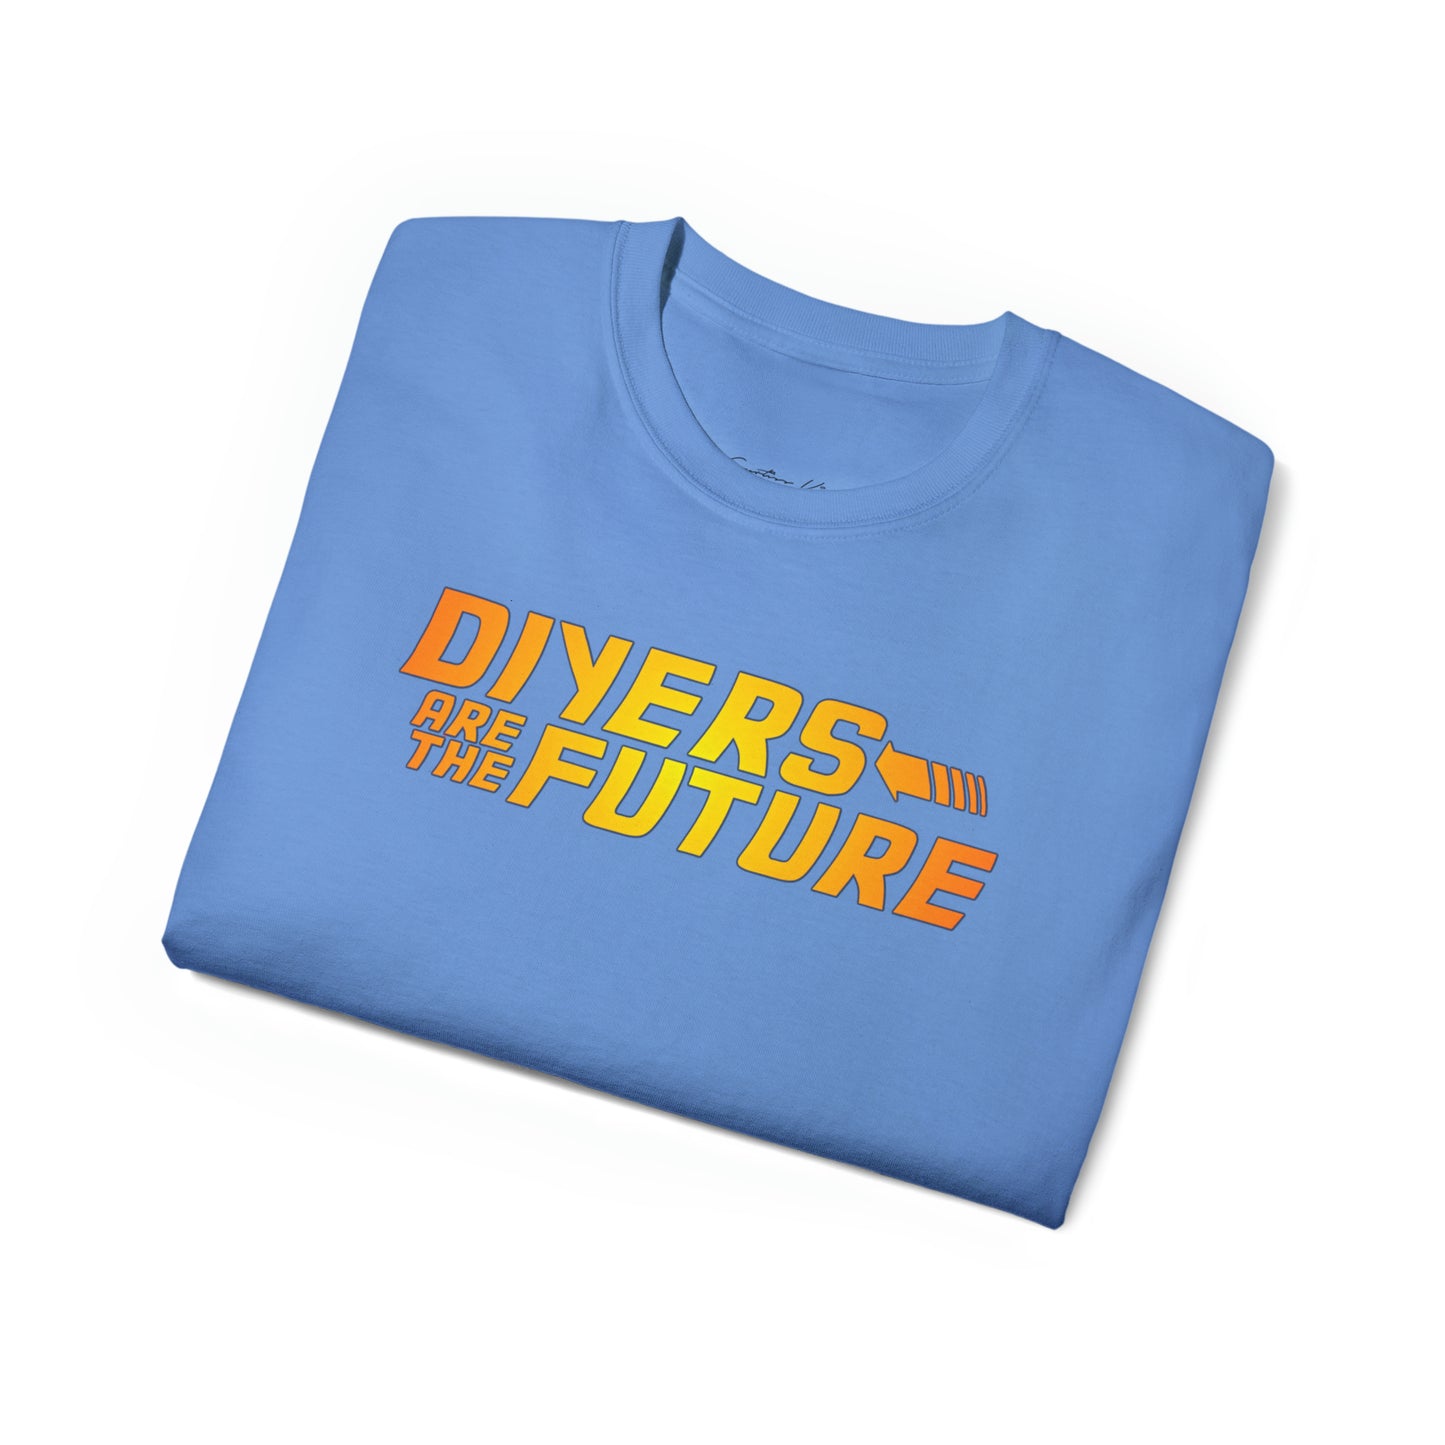 Diyers Are The Future Tee [Light Mode]